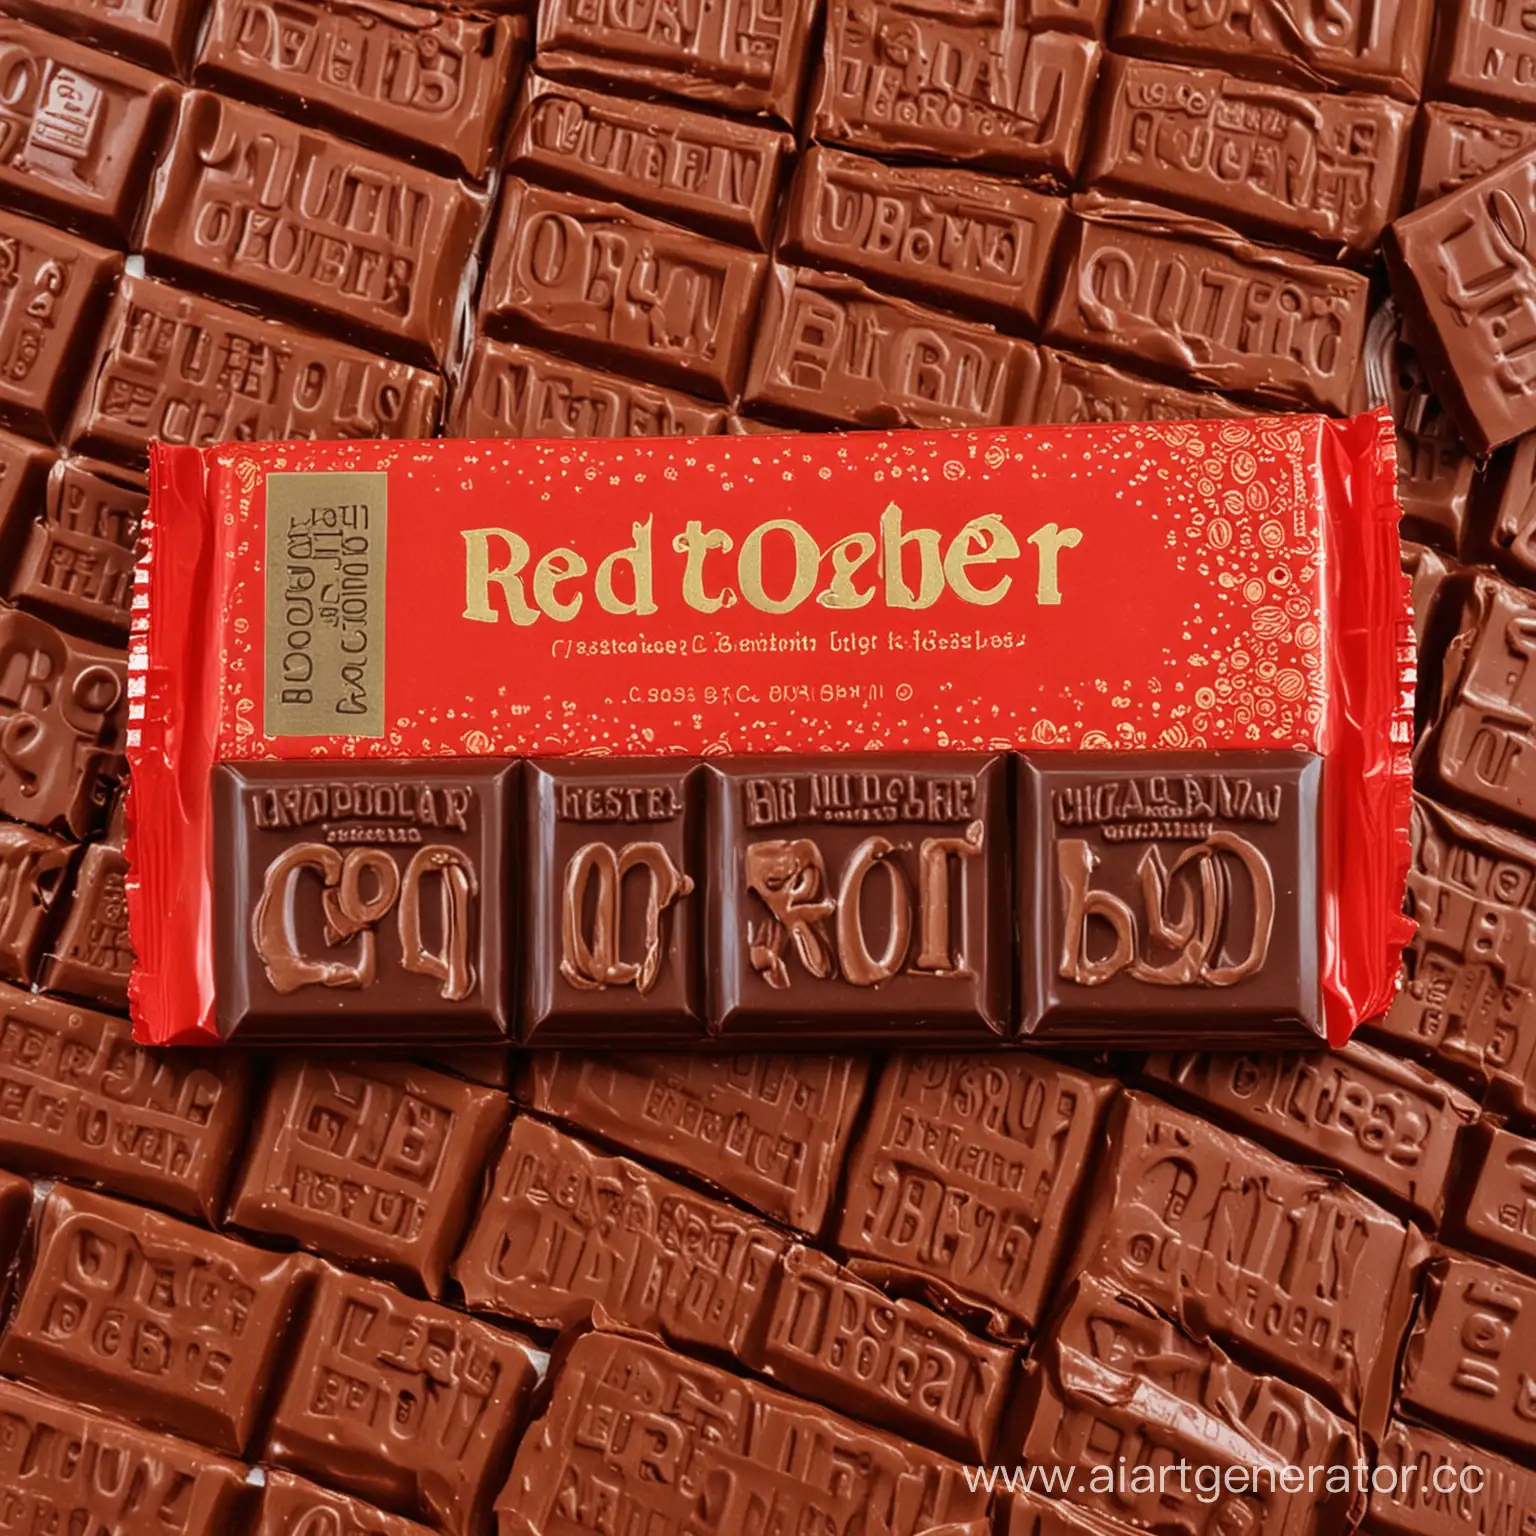 Delicious-Chocolate-Bar-with-Red-October-Inscription